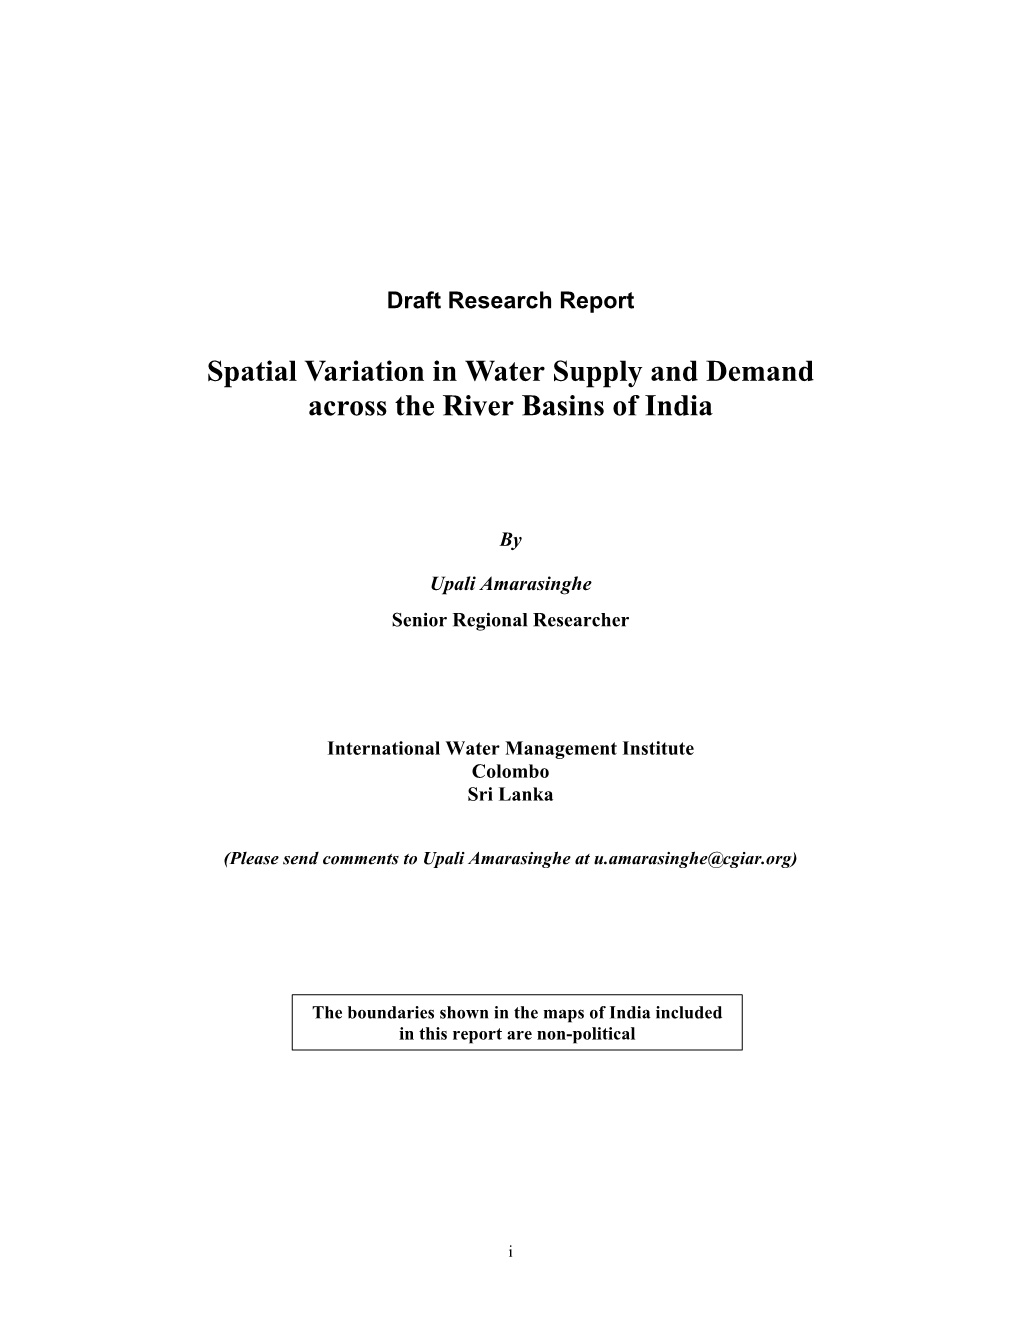 Spatial Variation in Water Supply and Demand Across the River Basins of India